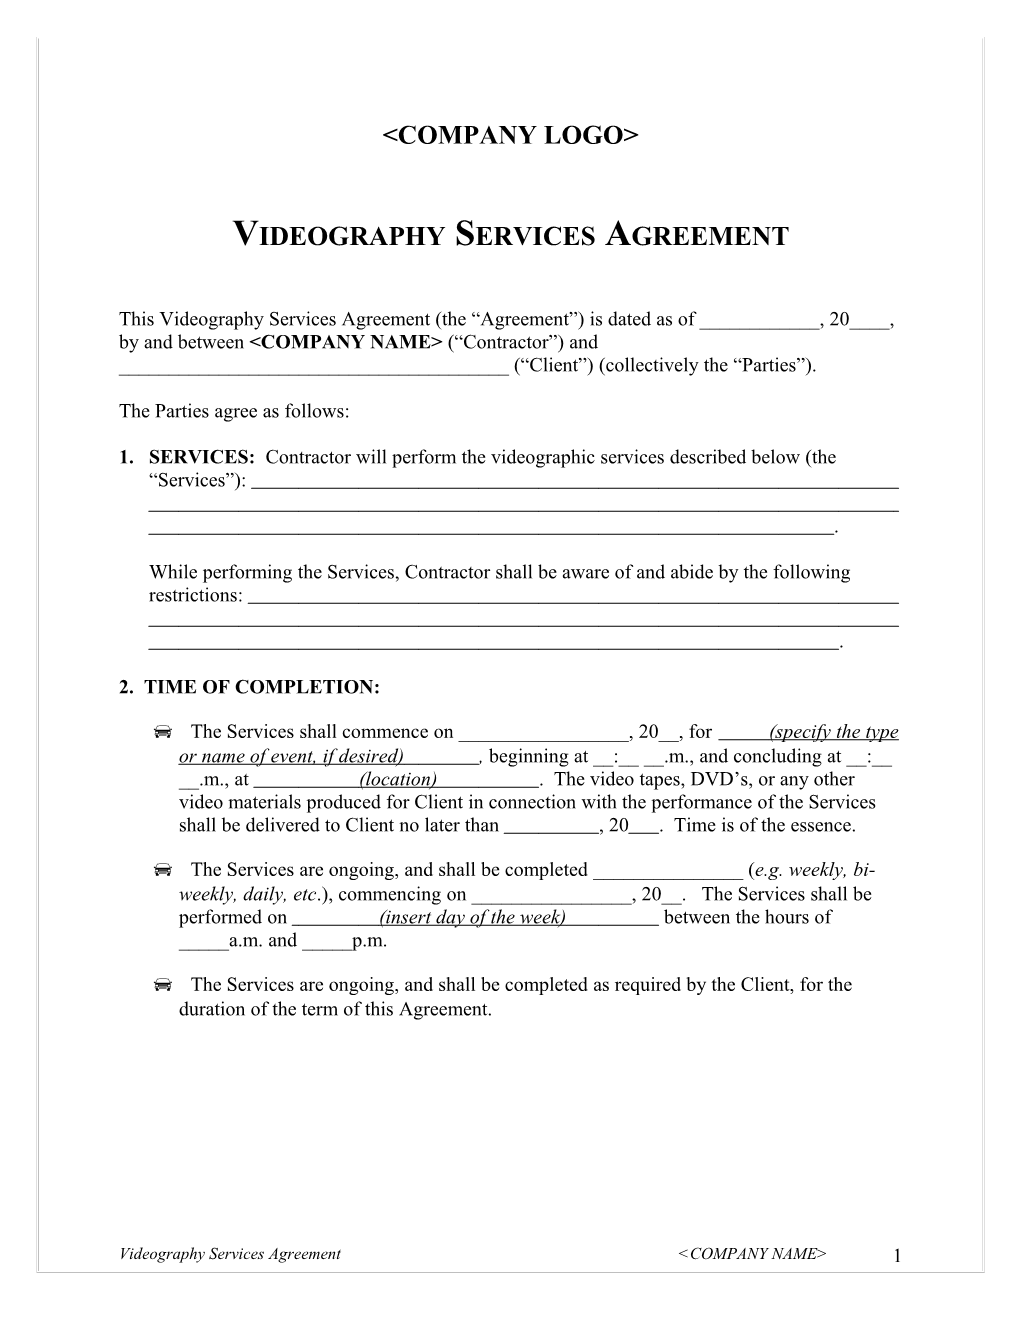 Videography Services Agreement